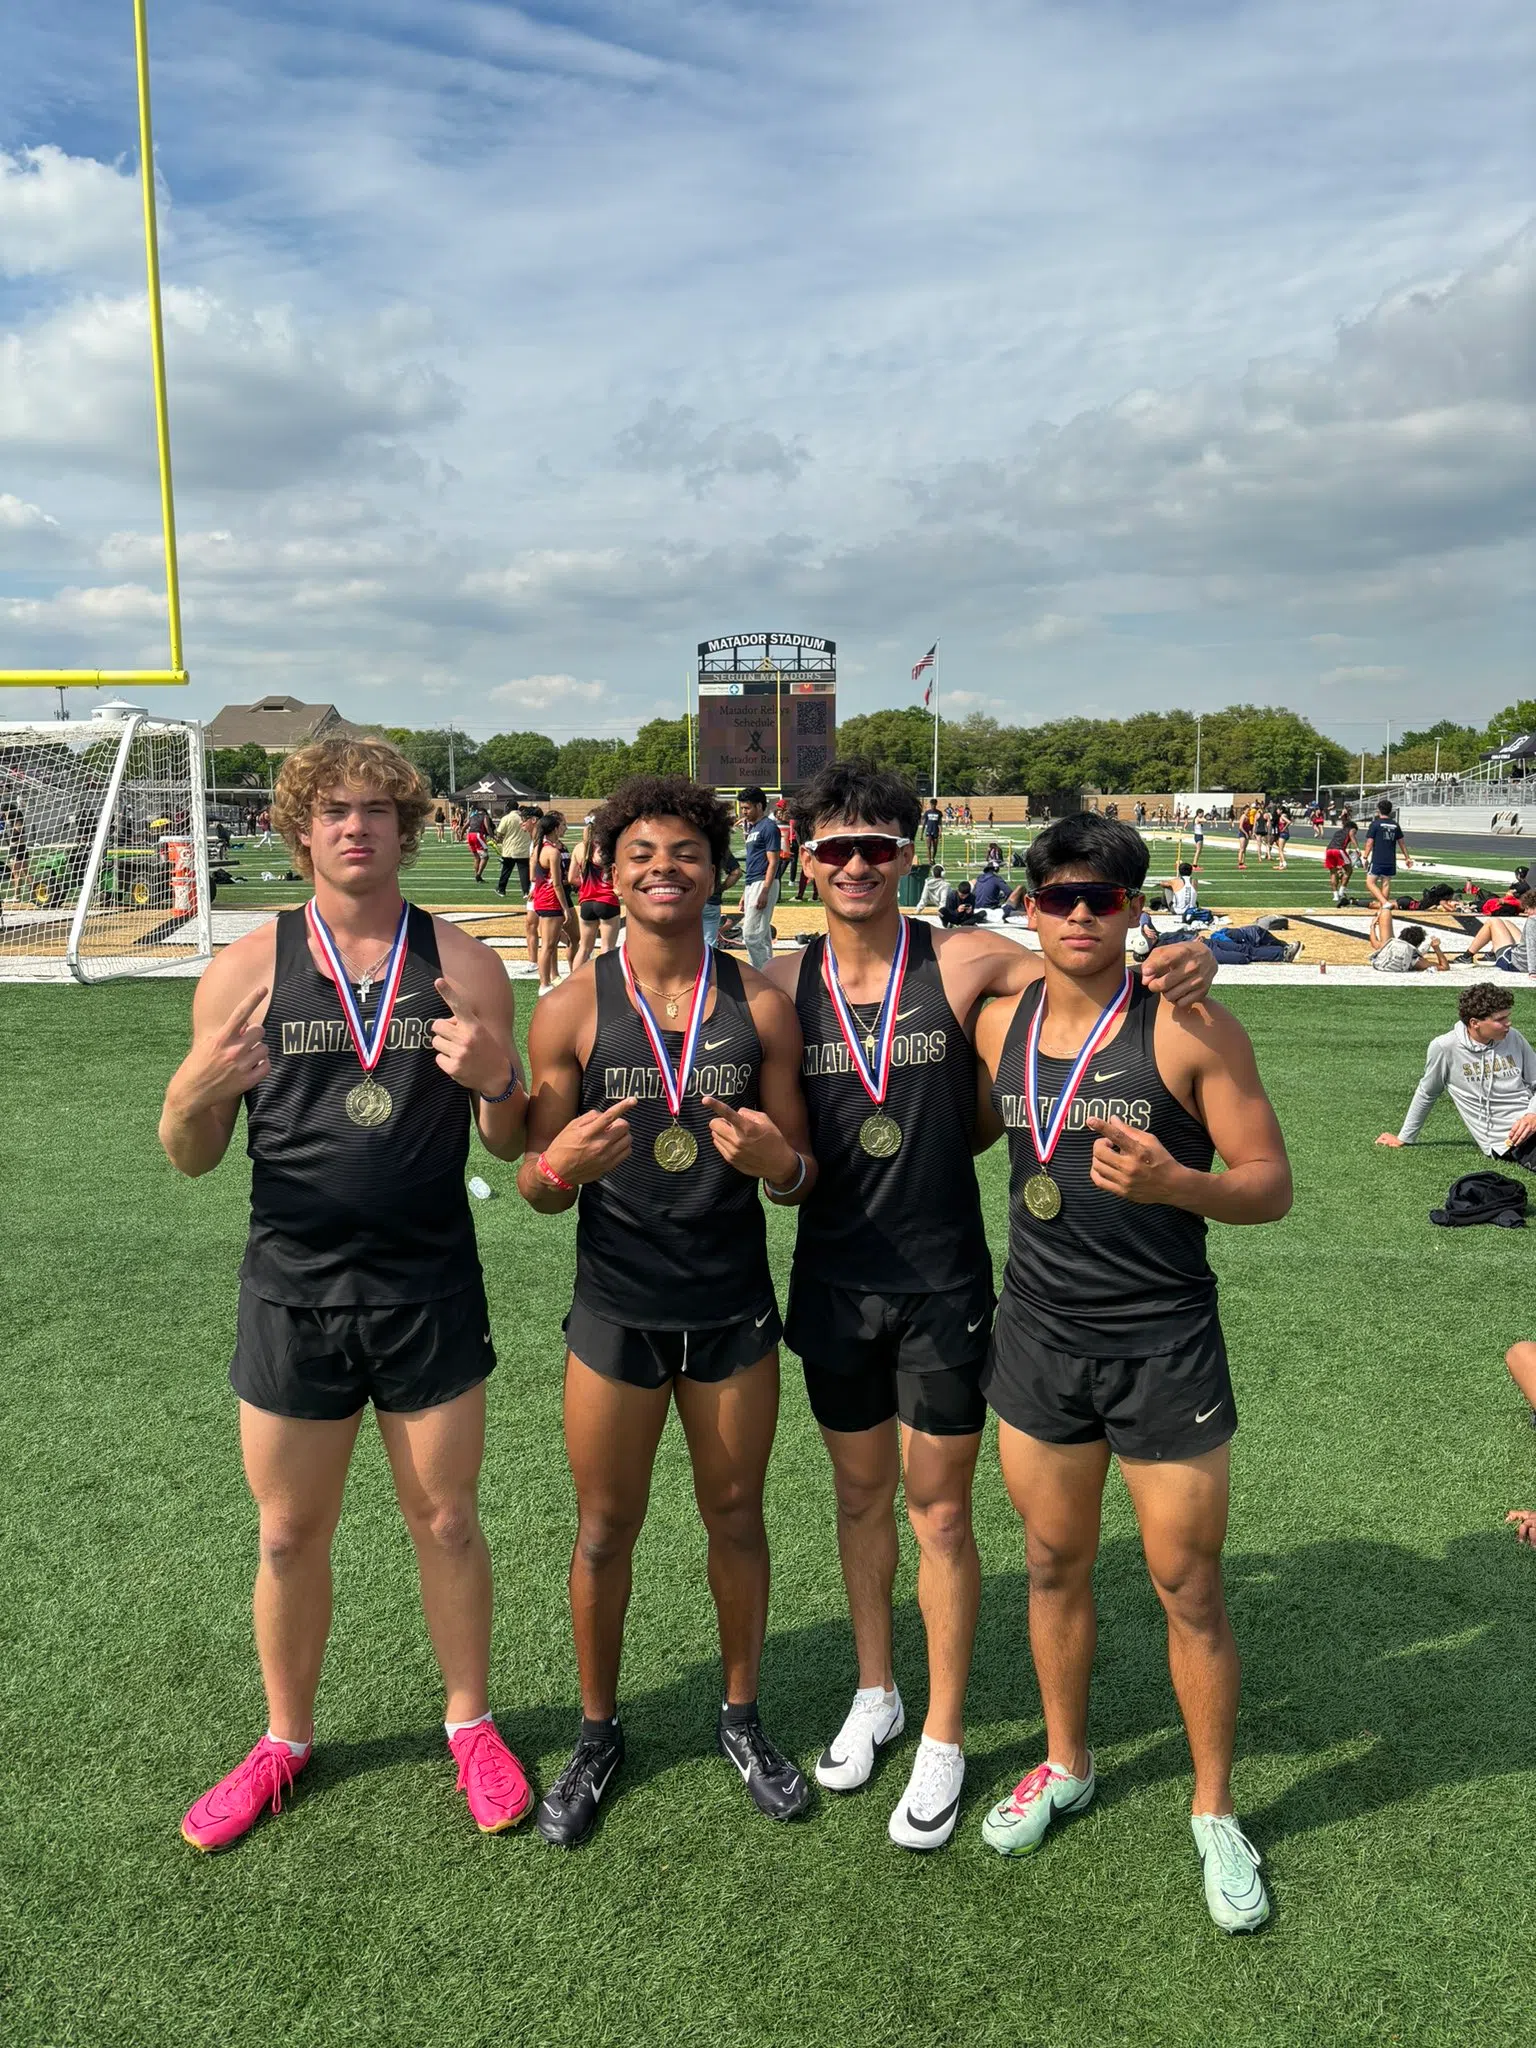 Area high school track teams to compete at regionals